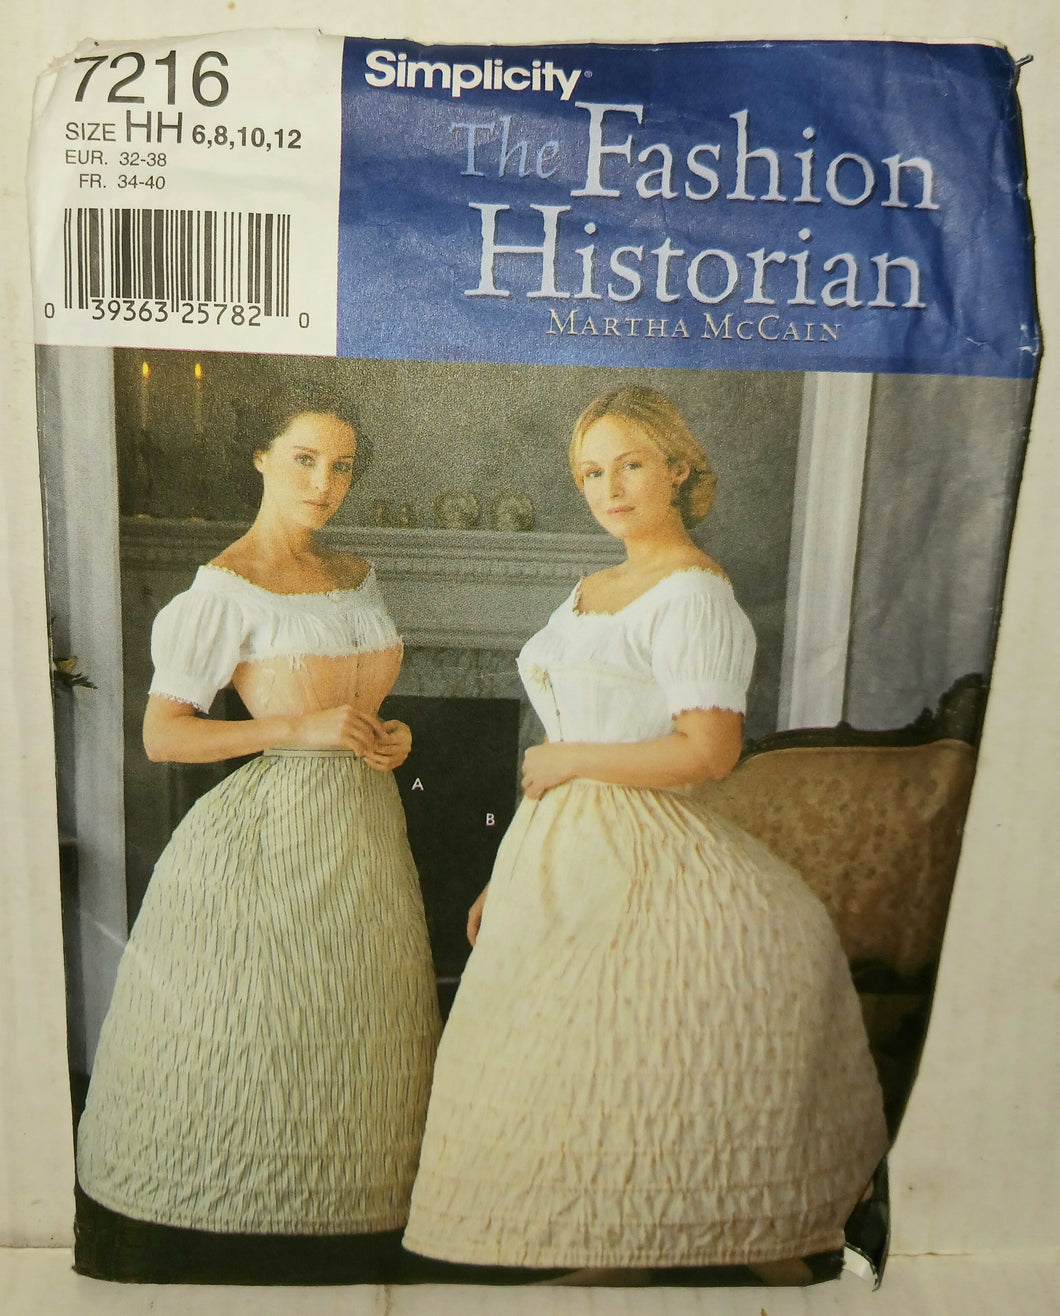 Simplicity Vintage Sewing Pattern NWT New Uncut 7216 Martha McCain The Fashion Historian Misses Crinoline Hoopskirt Size HH 6 8 10 12 2002